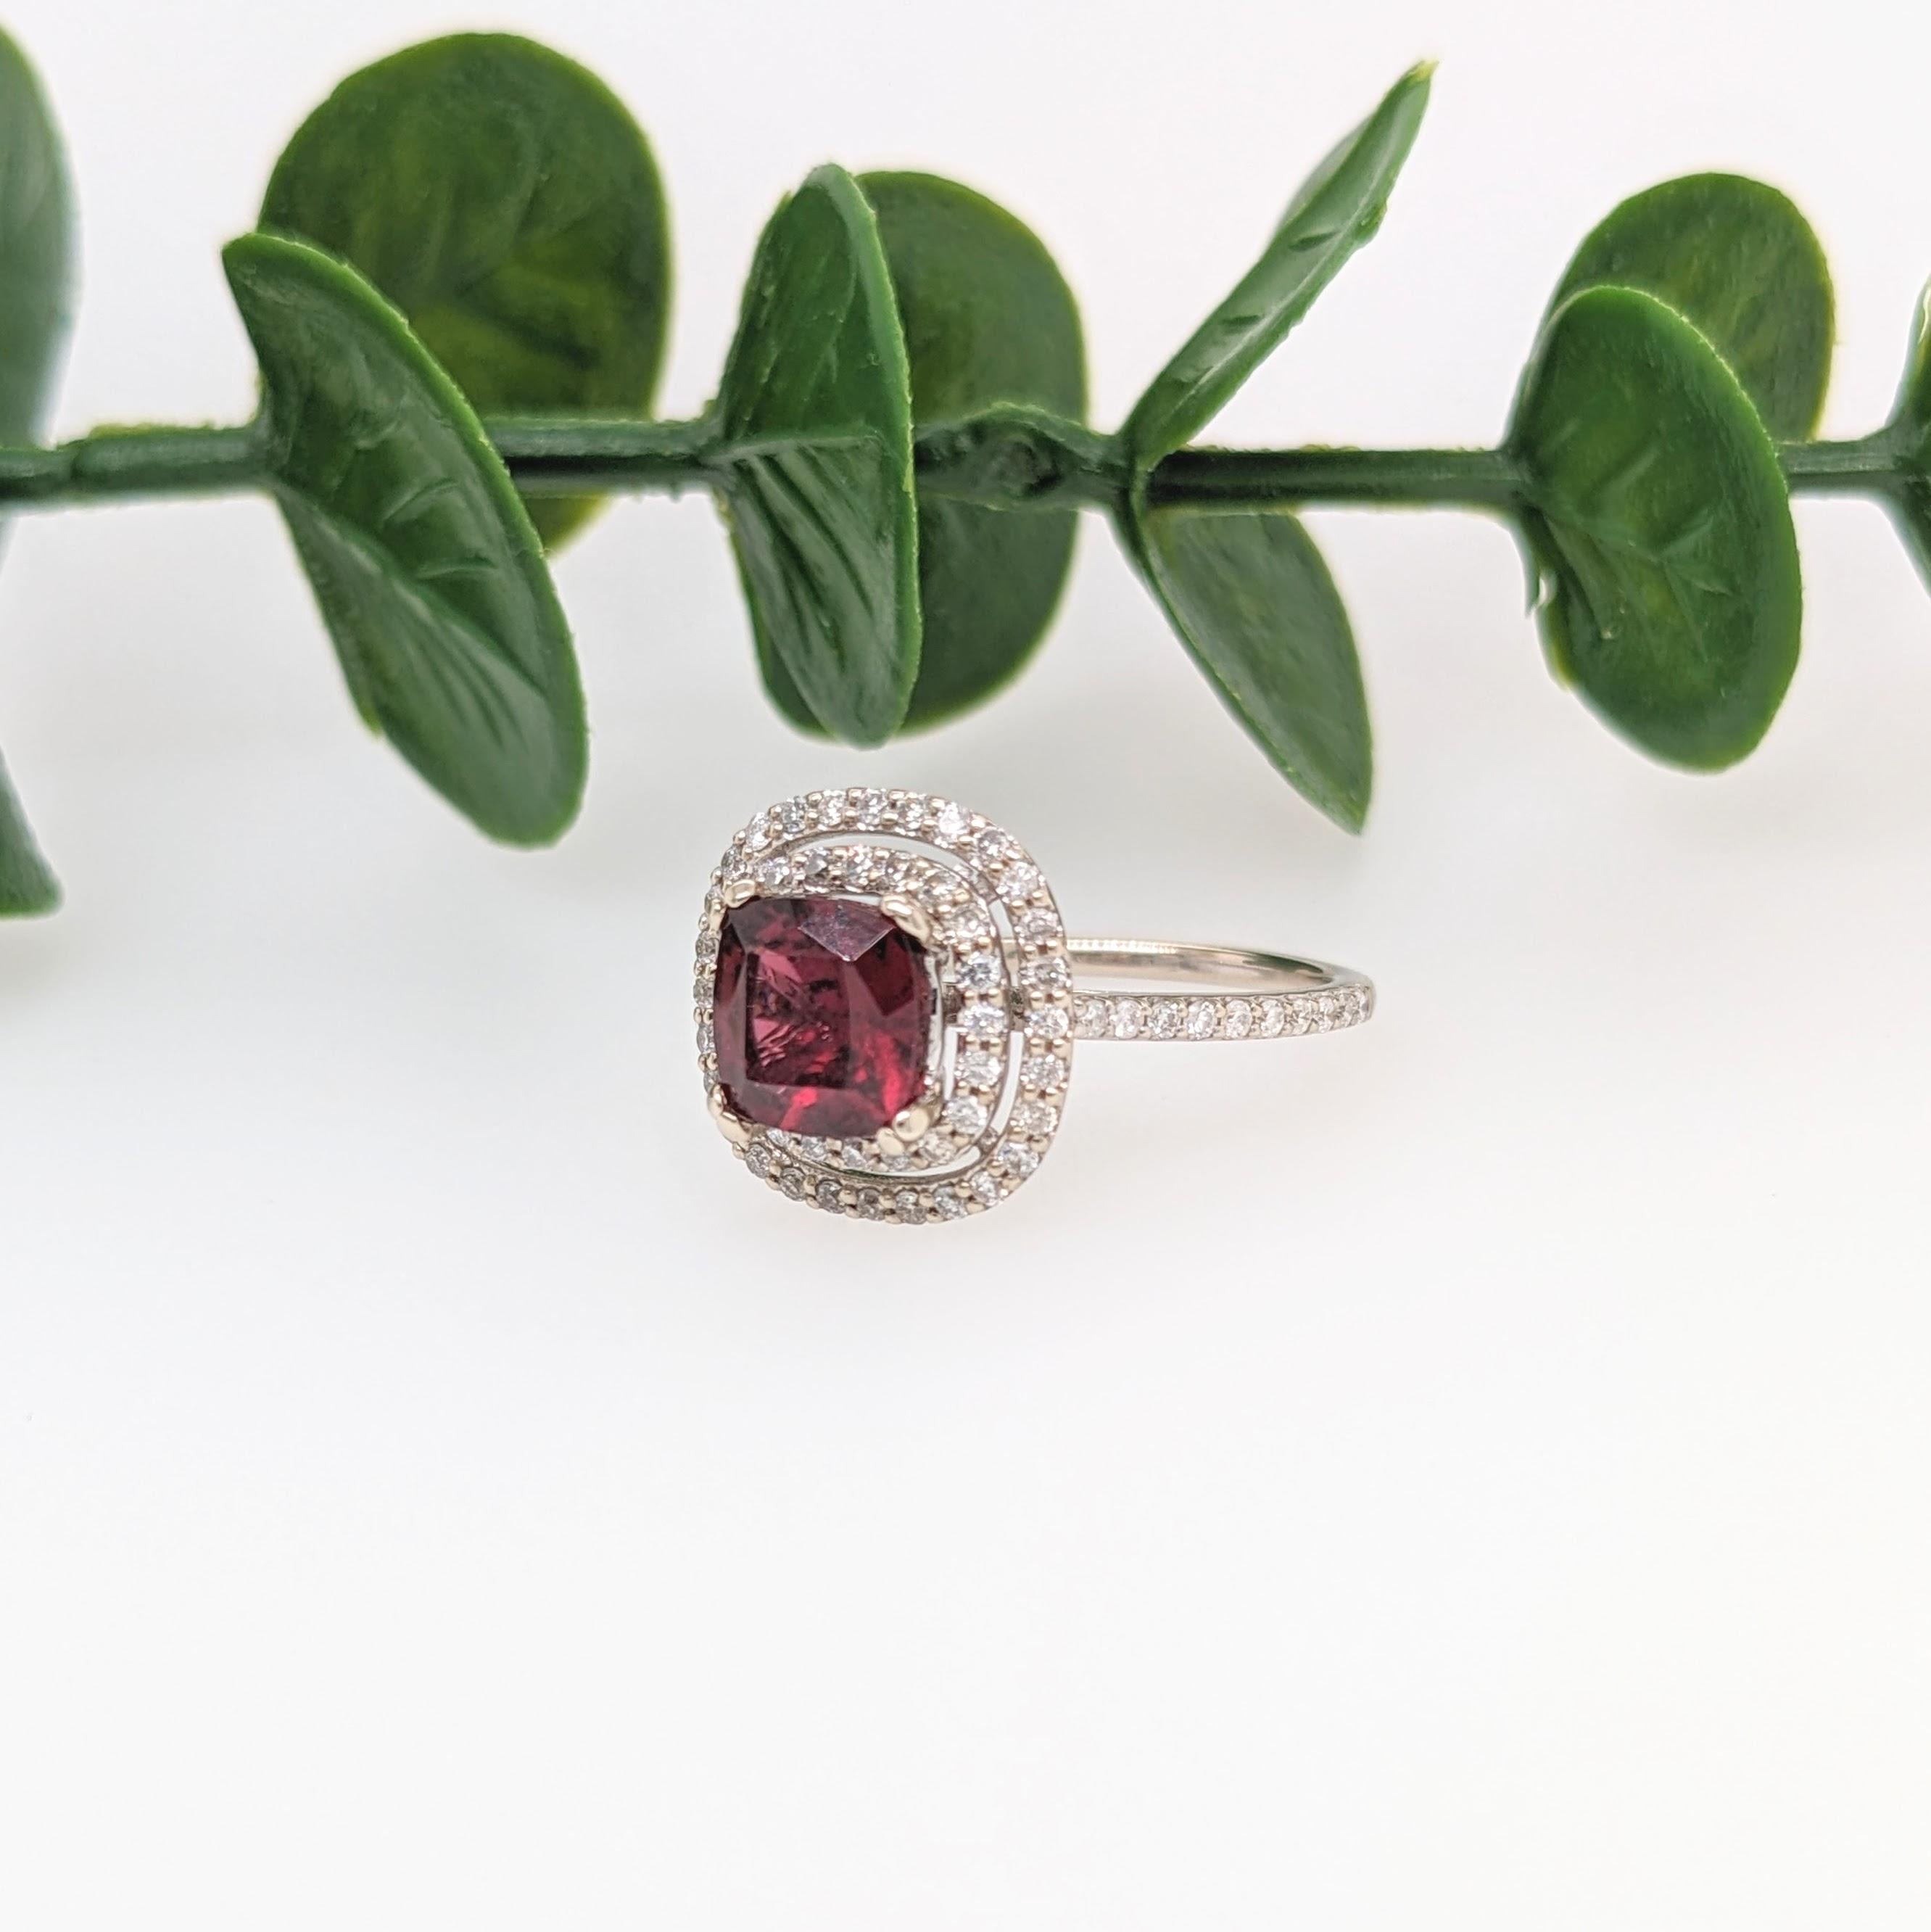 This ring is sure to make a statement with its 6mm cushion cut Red Rhodolite center stone, embellished with beautiful double halo of diamond accents in solid 14k White Gold.

Specifications

Item Type: Ring
Center Stone: Rhodolite
Treatment: